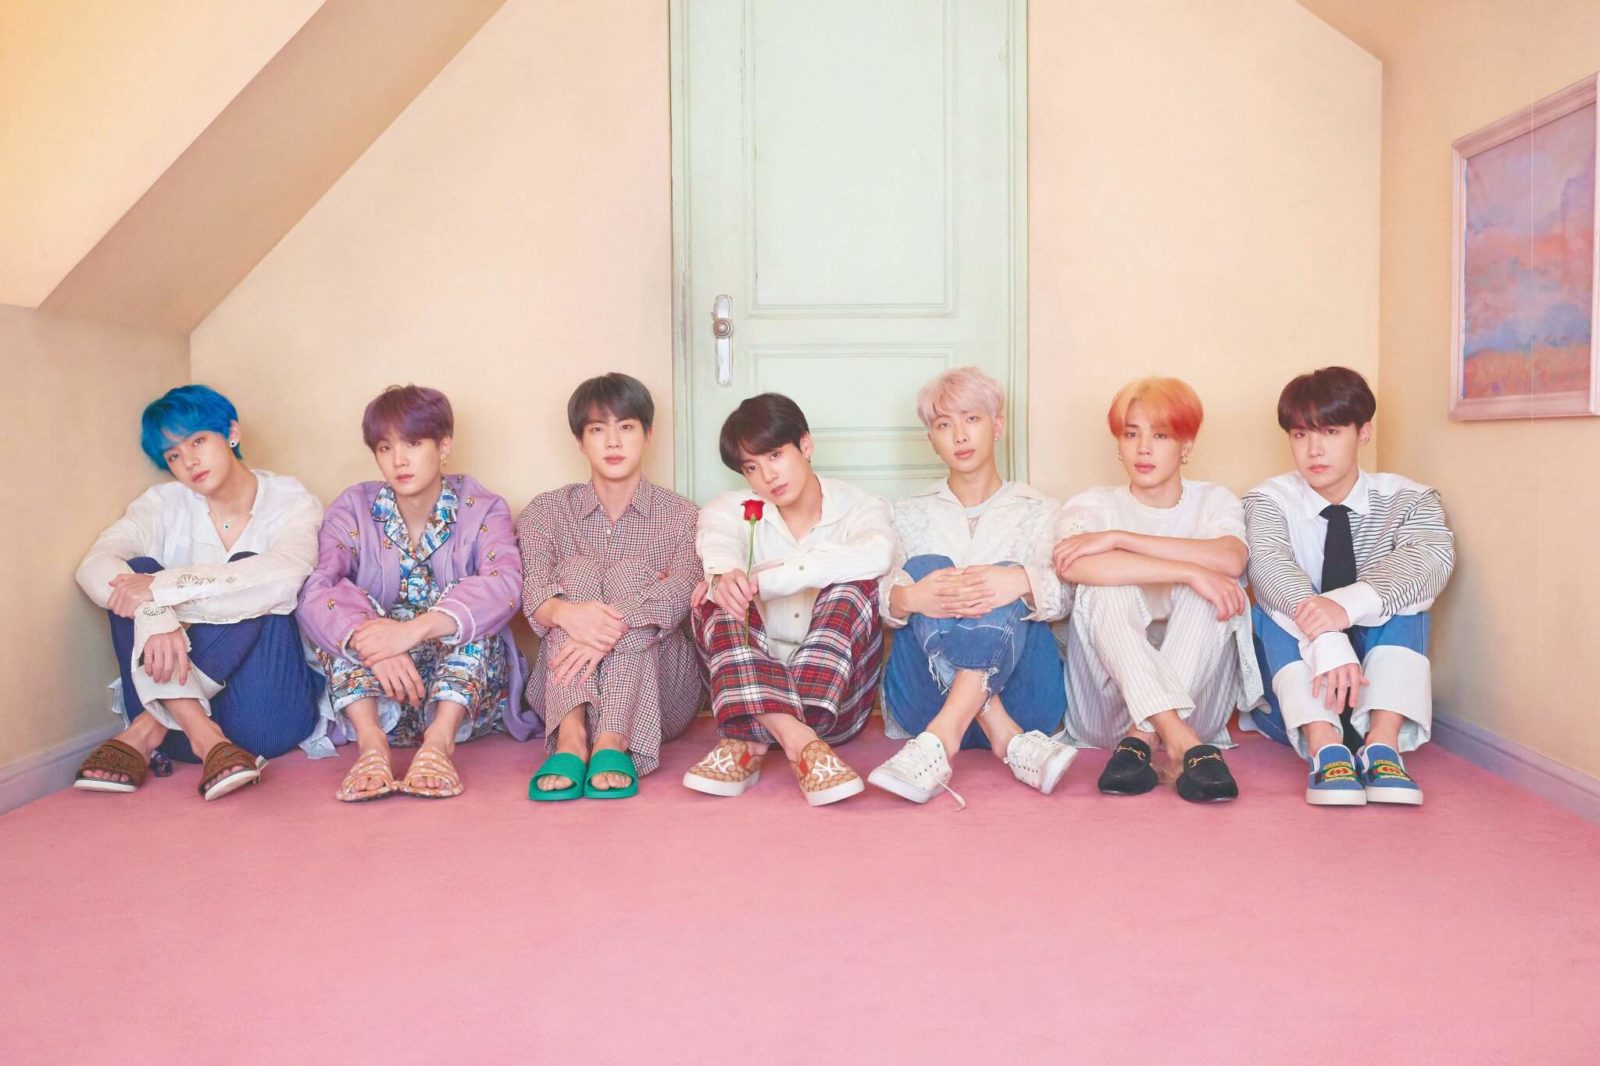 BTS "Map of the Soul: Persona"